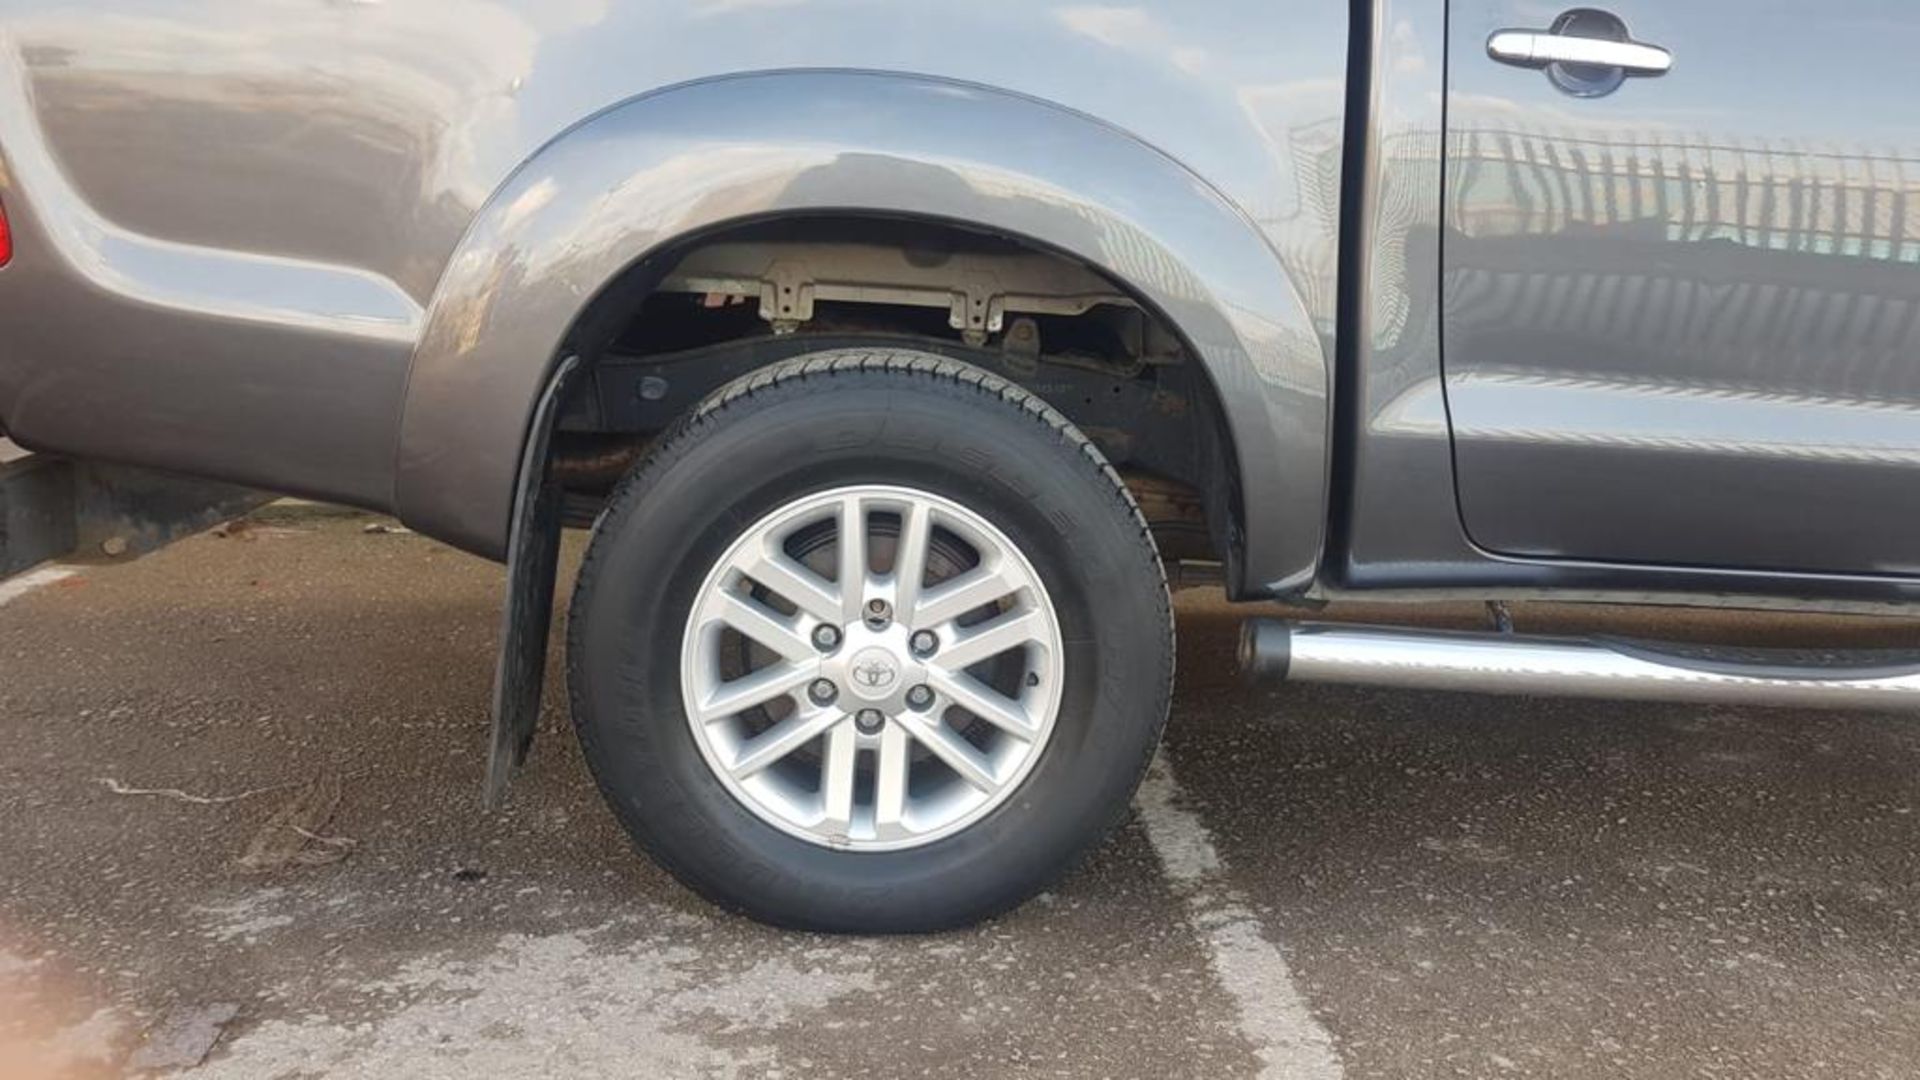 2015/64 REG TOYOTA HILUX INVINCIBLE D-4D 4X4 GREY DIESEL LIGHT UTILITY, SHOWING 1 FORMER KEEPER - Image 12 of 22